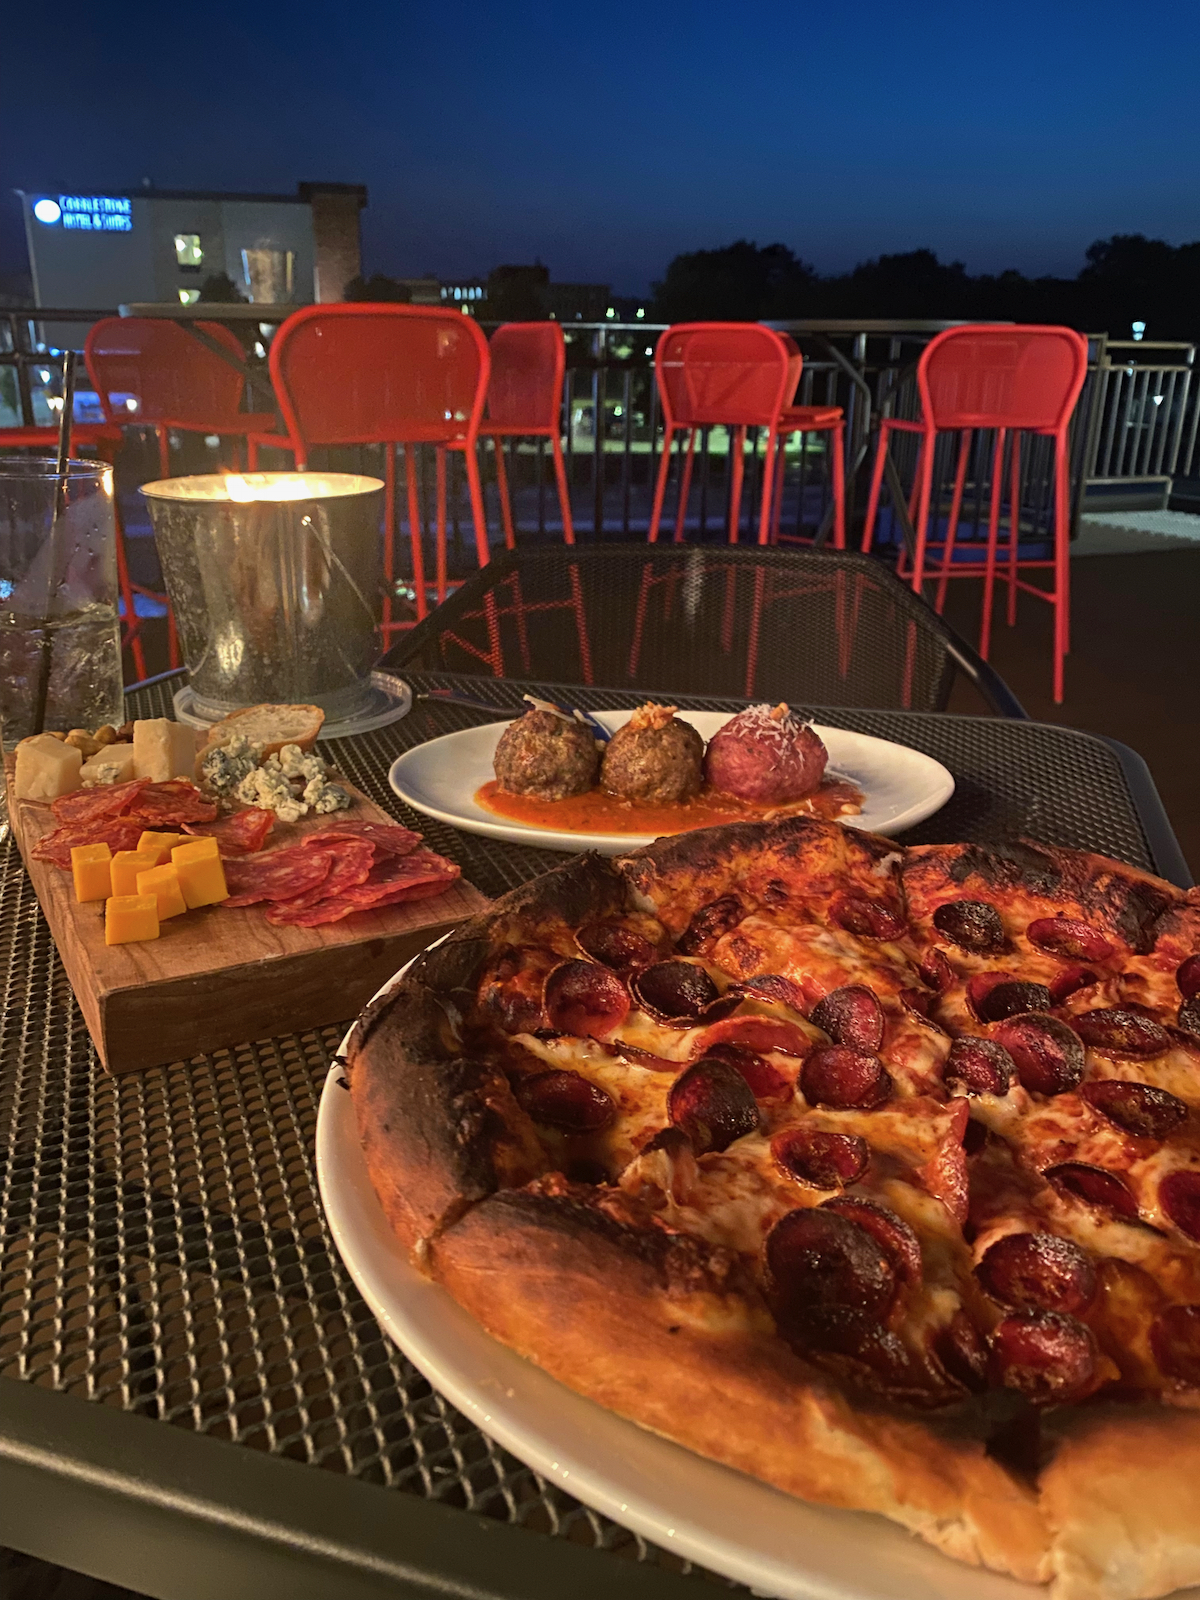 Pizza, meatballs and charcuterie board at Genisa Wine Bar in Janesville, Wisconsin